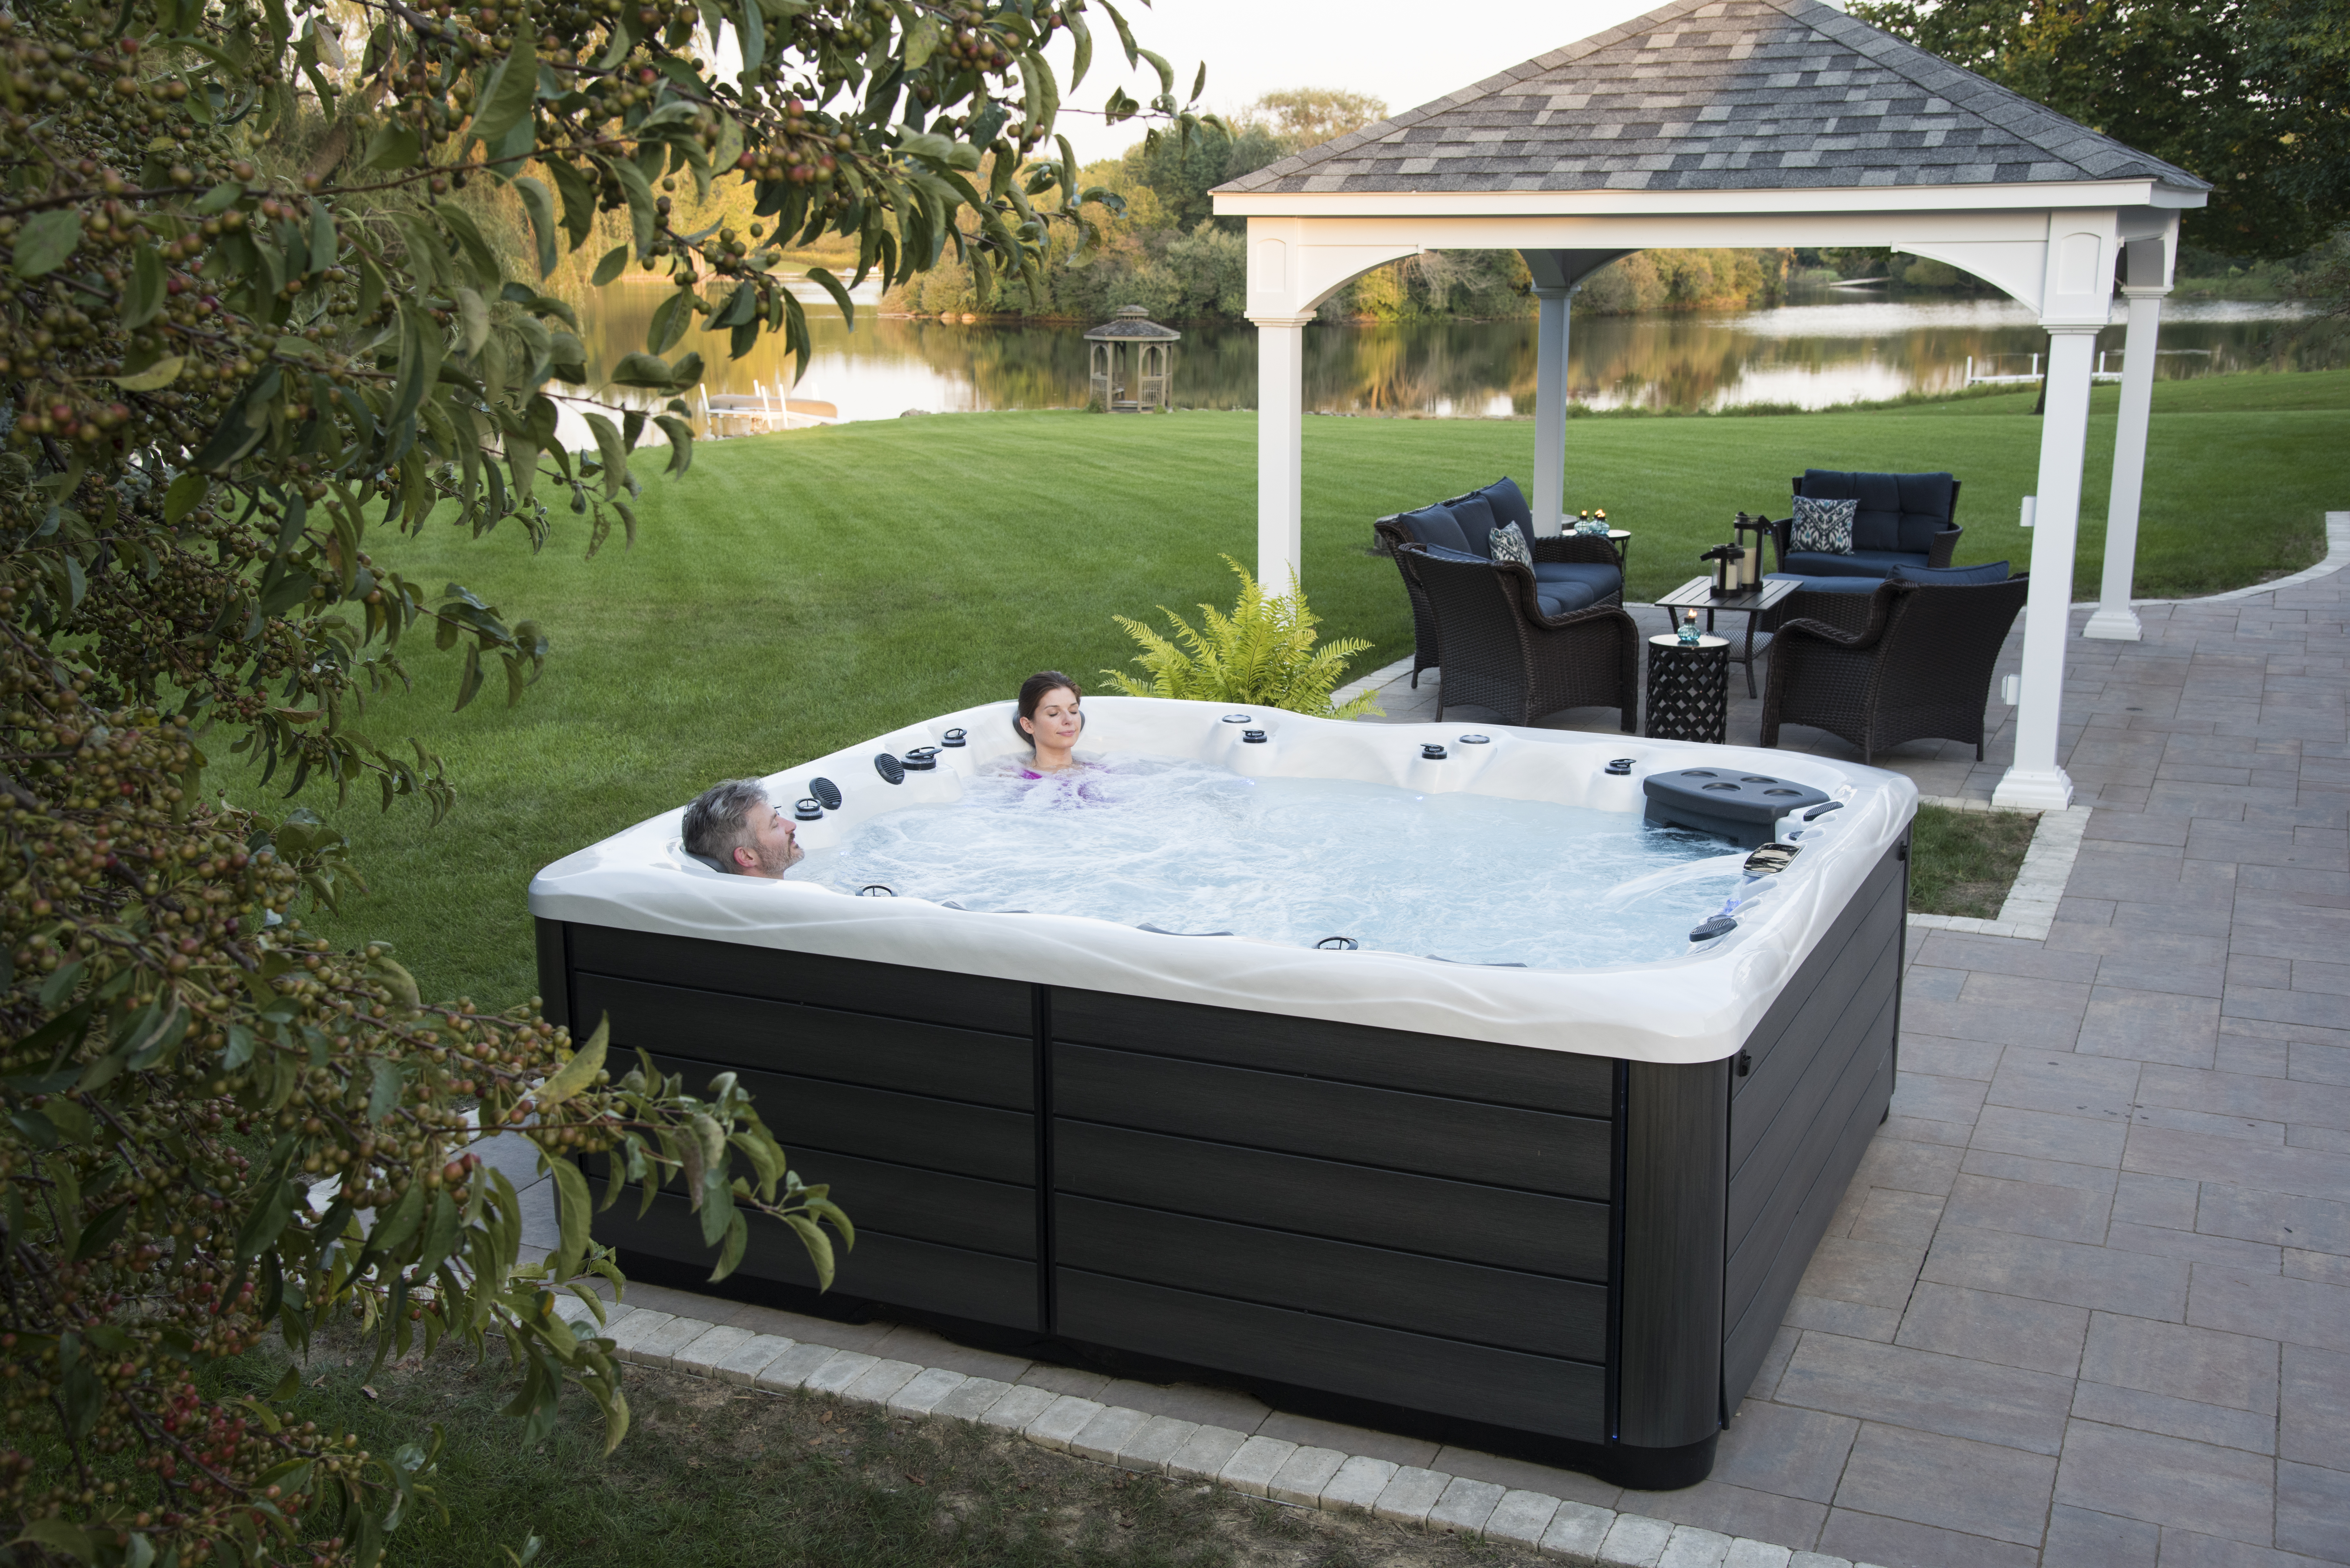 What's Wrong With how to get a hot tub in your backyard